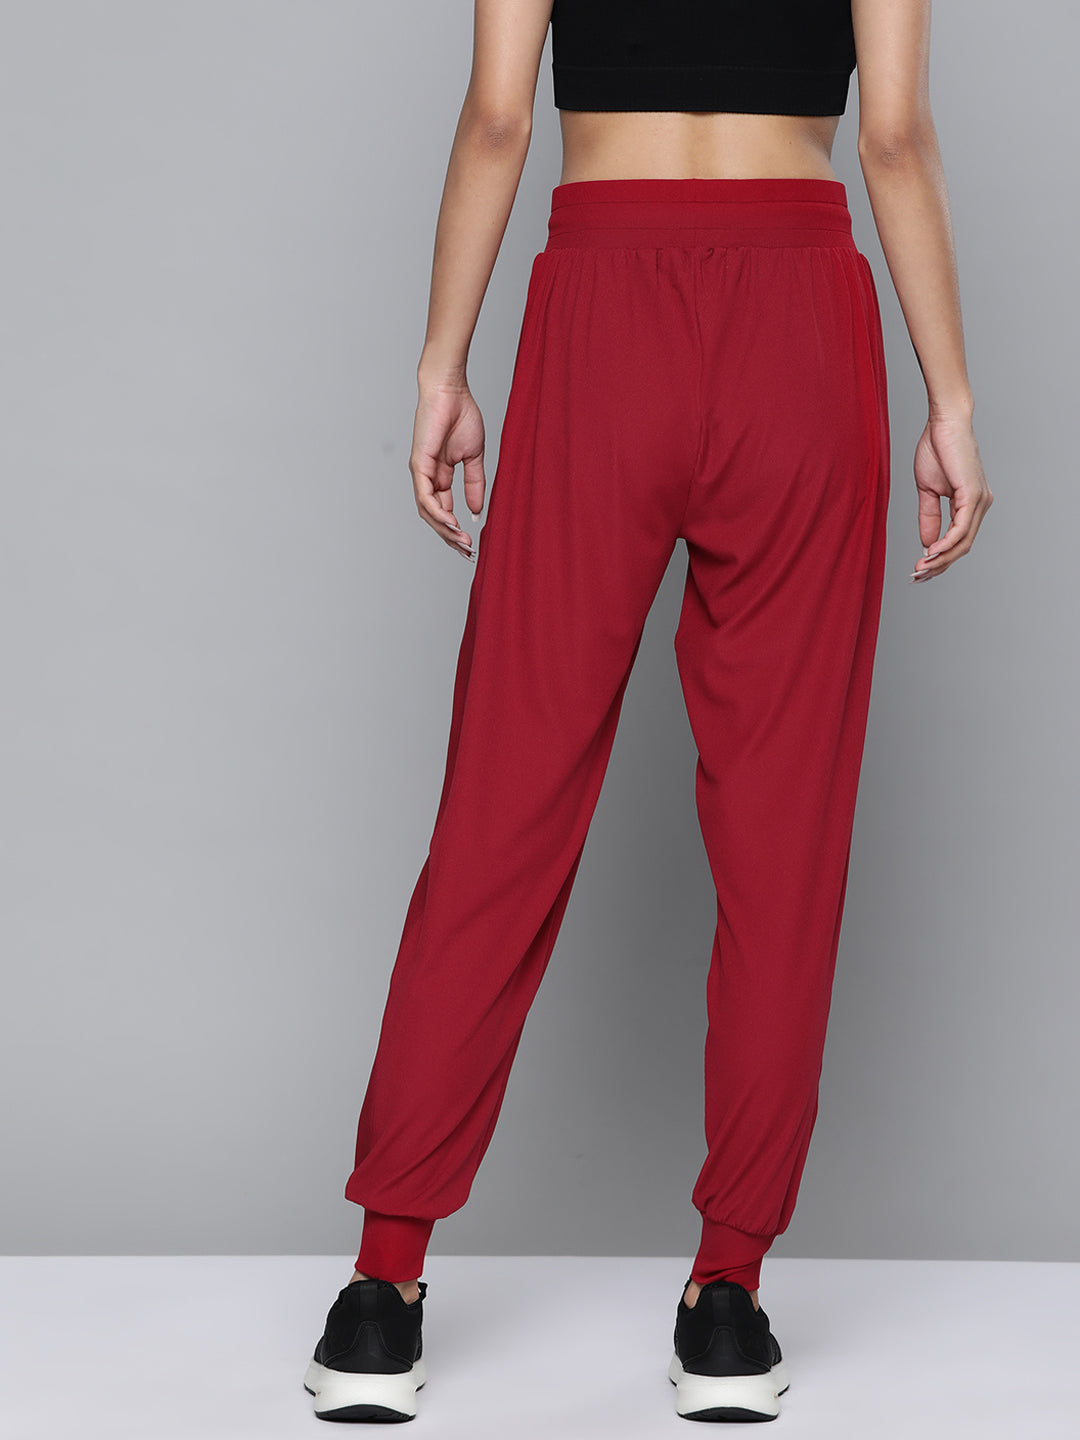 Buy Kissero Cotton Fit Solid Women's Solid Red Track Pant Women's Cotton Track  Pants,Joggers, Gym, Active WearActive Wear, Yoga Online at Best Prices in  India - JioMart.